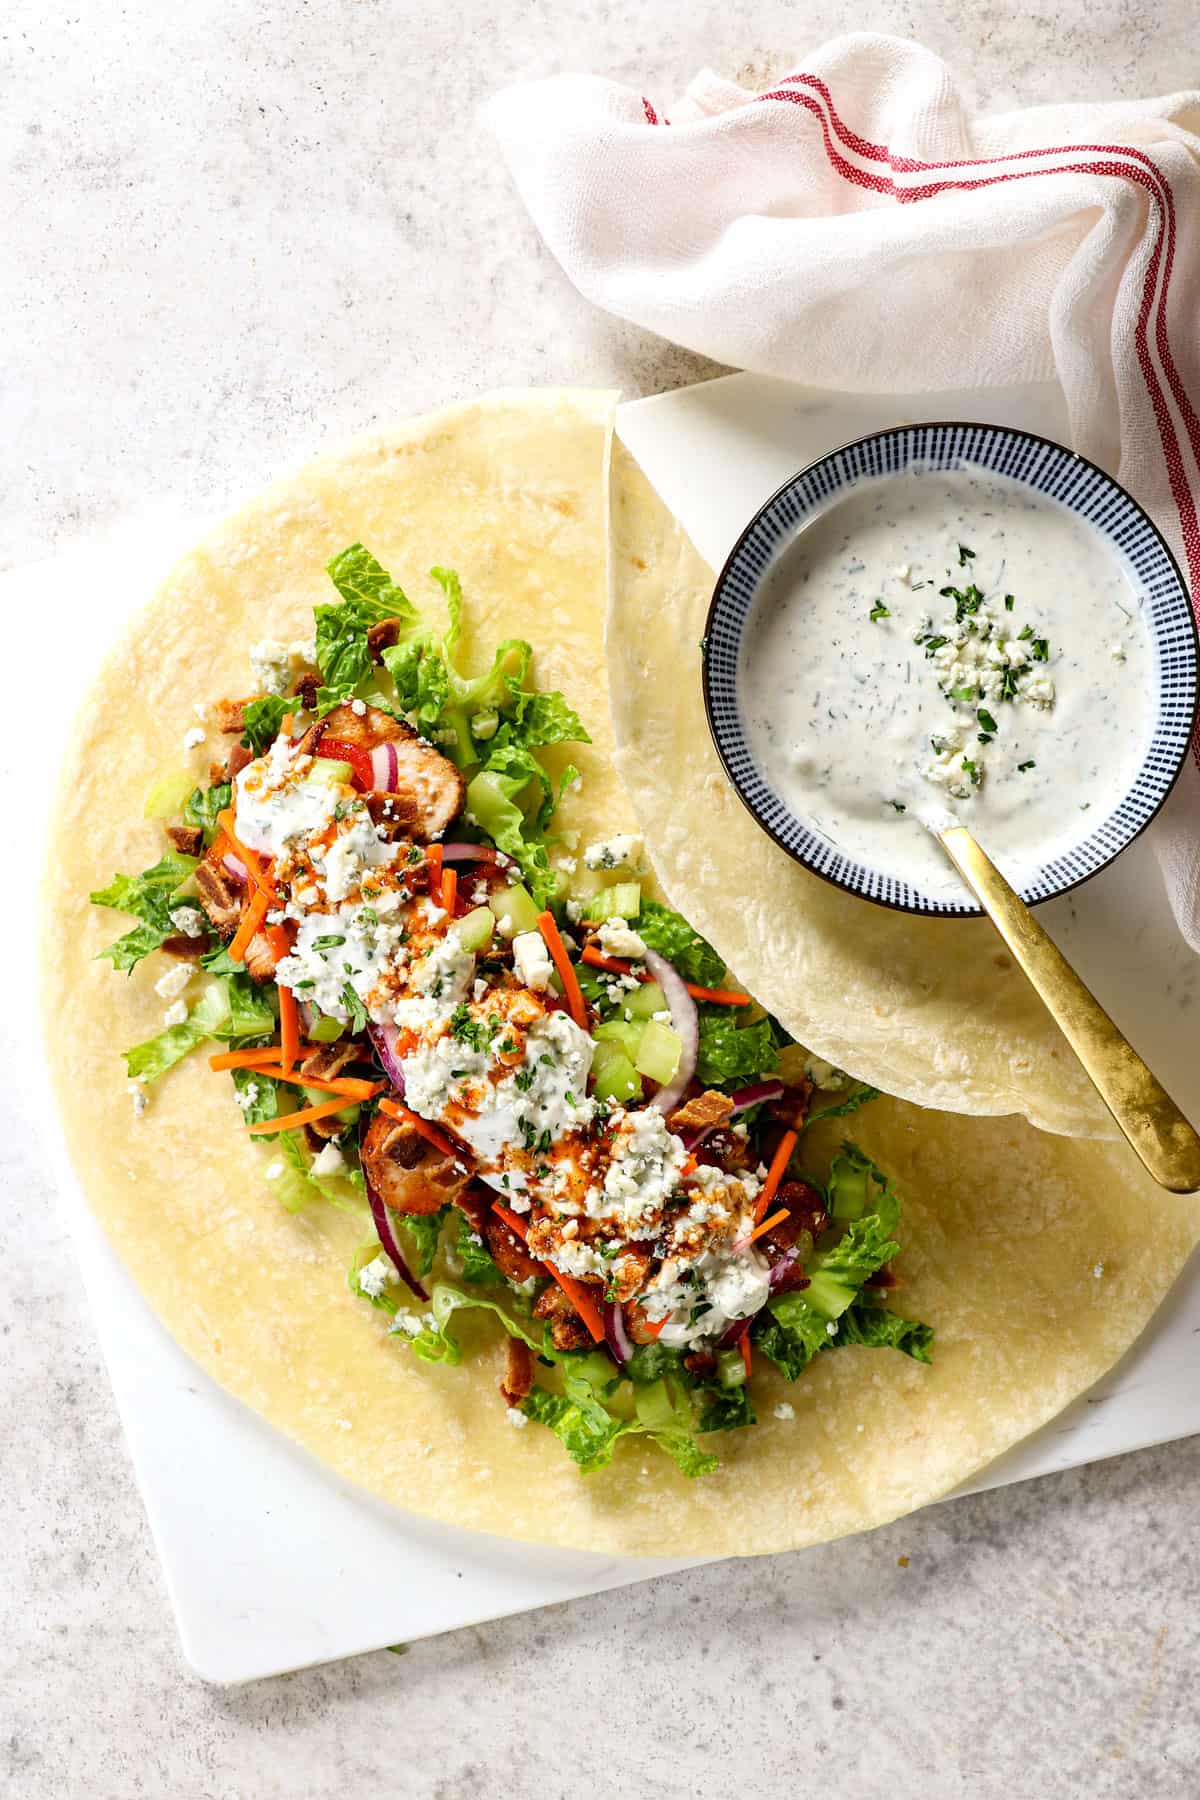 showing how to make buffalo chicken wraps by adding lining tortillas with lettuce, buffalo chicken, tomatoes, celery, carrots, red onions, bacon and blue cheese dressing